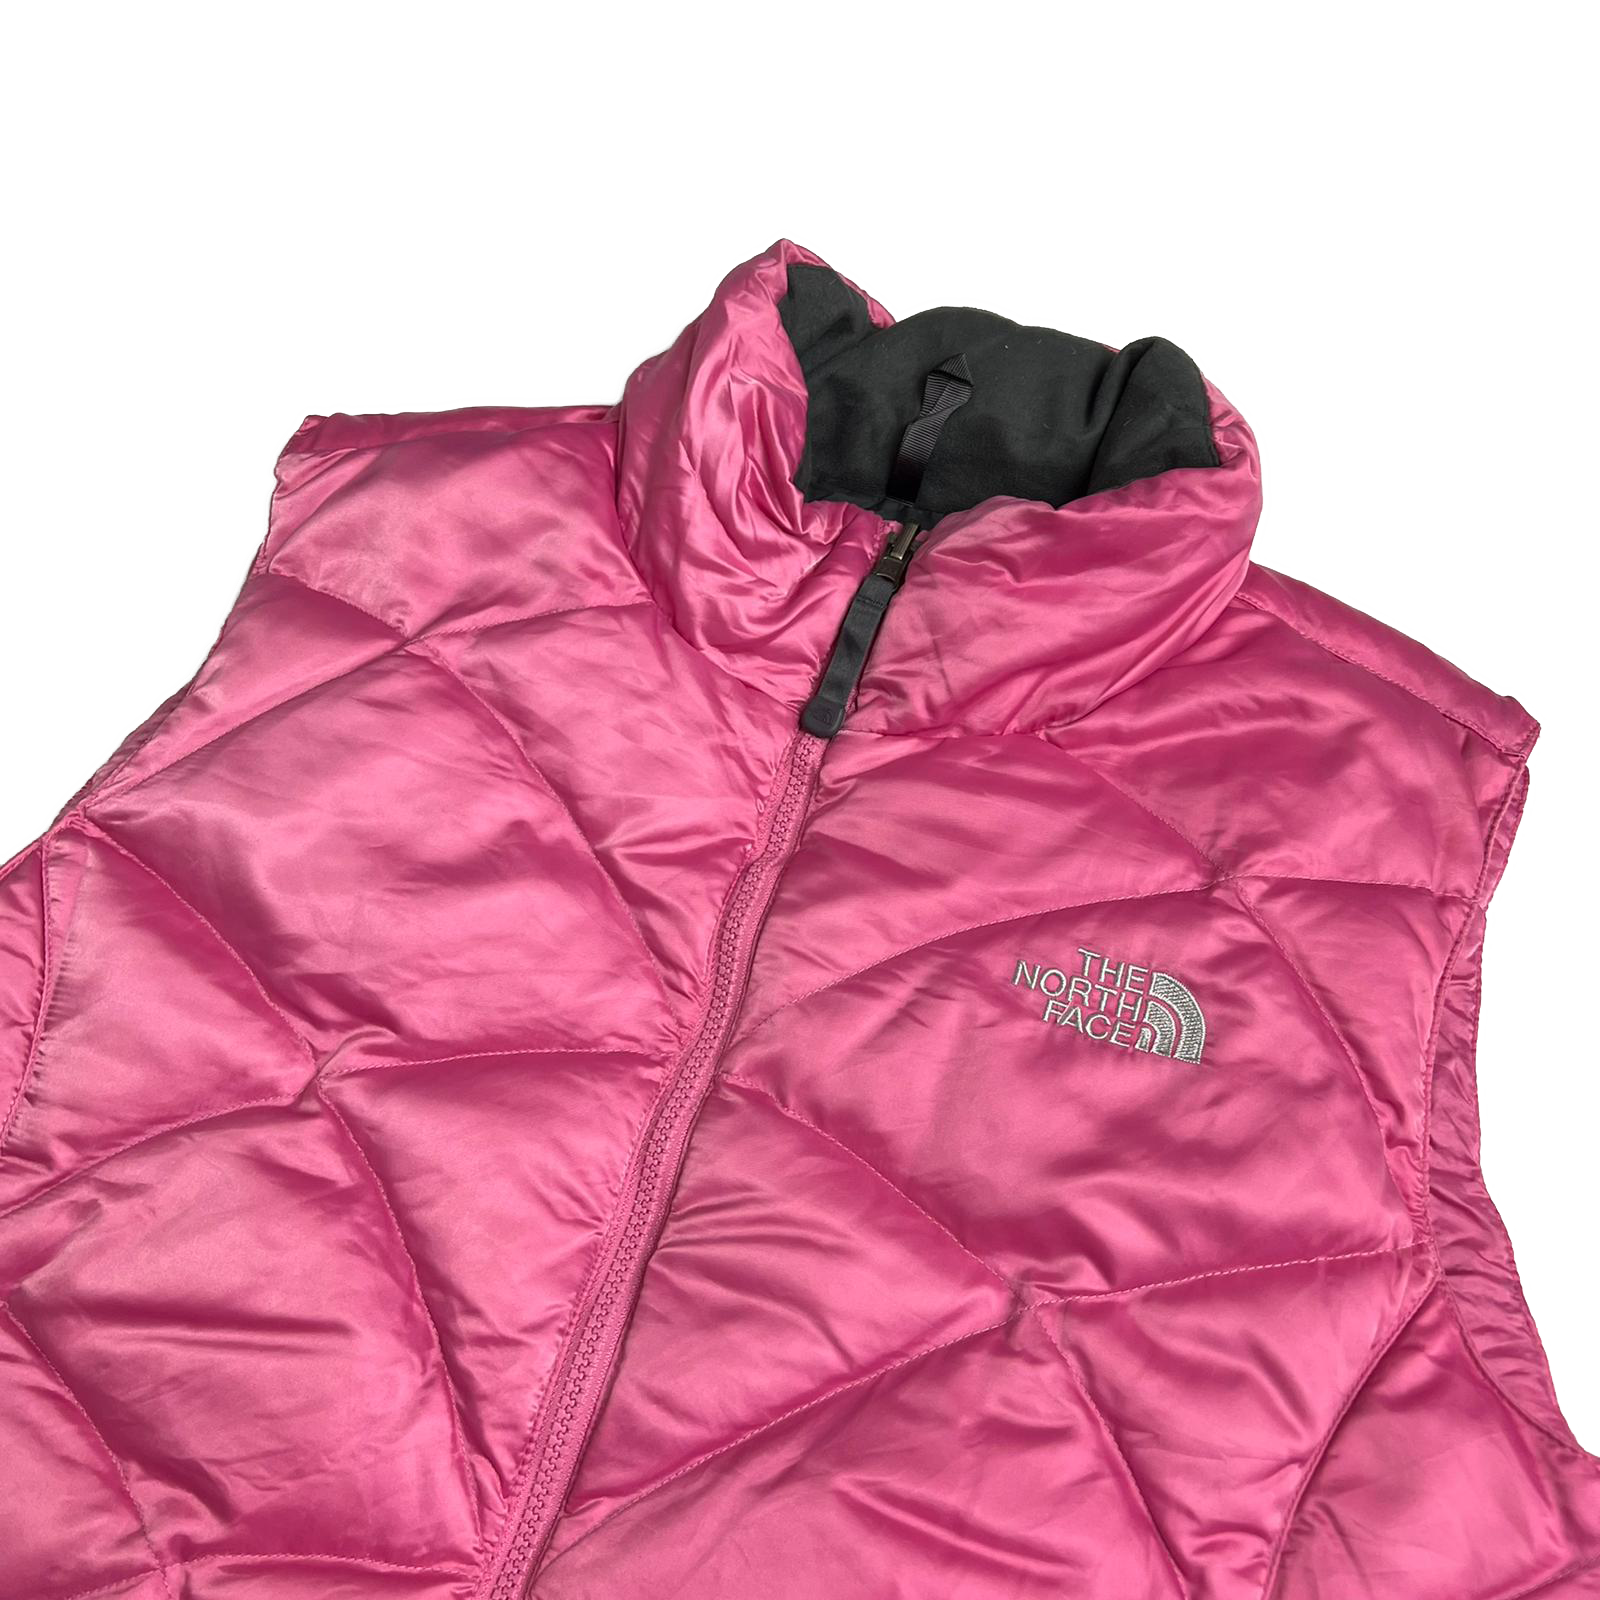 Women's The North Face 550 gilet